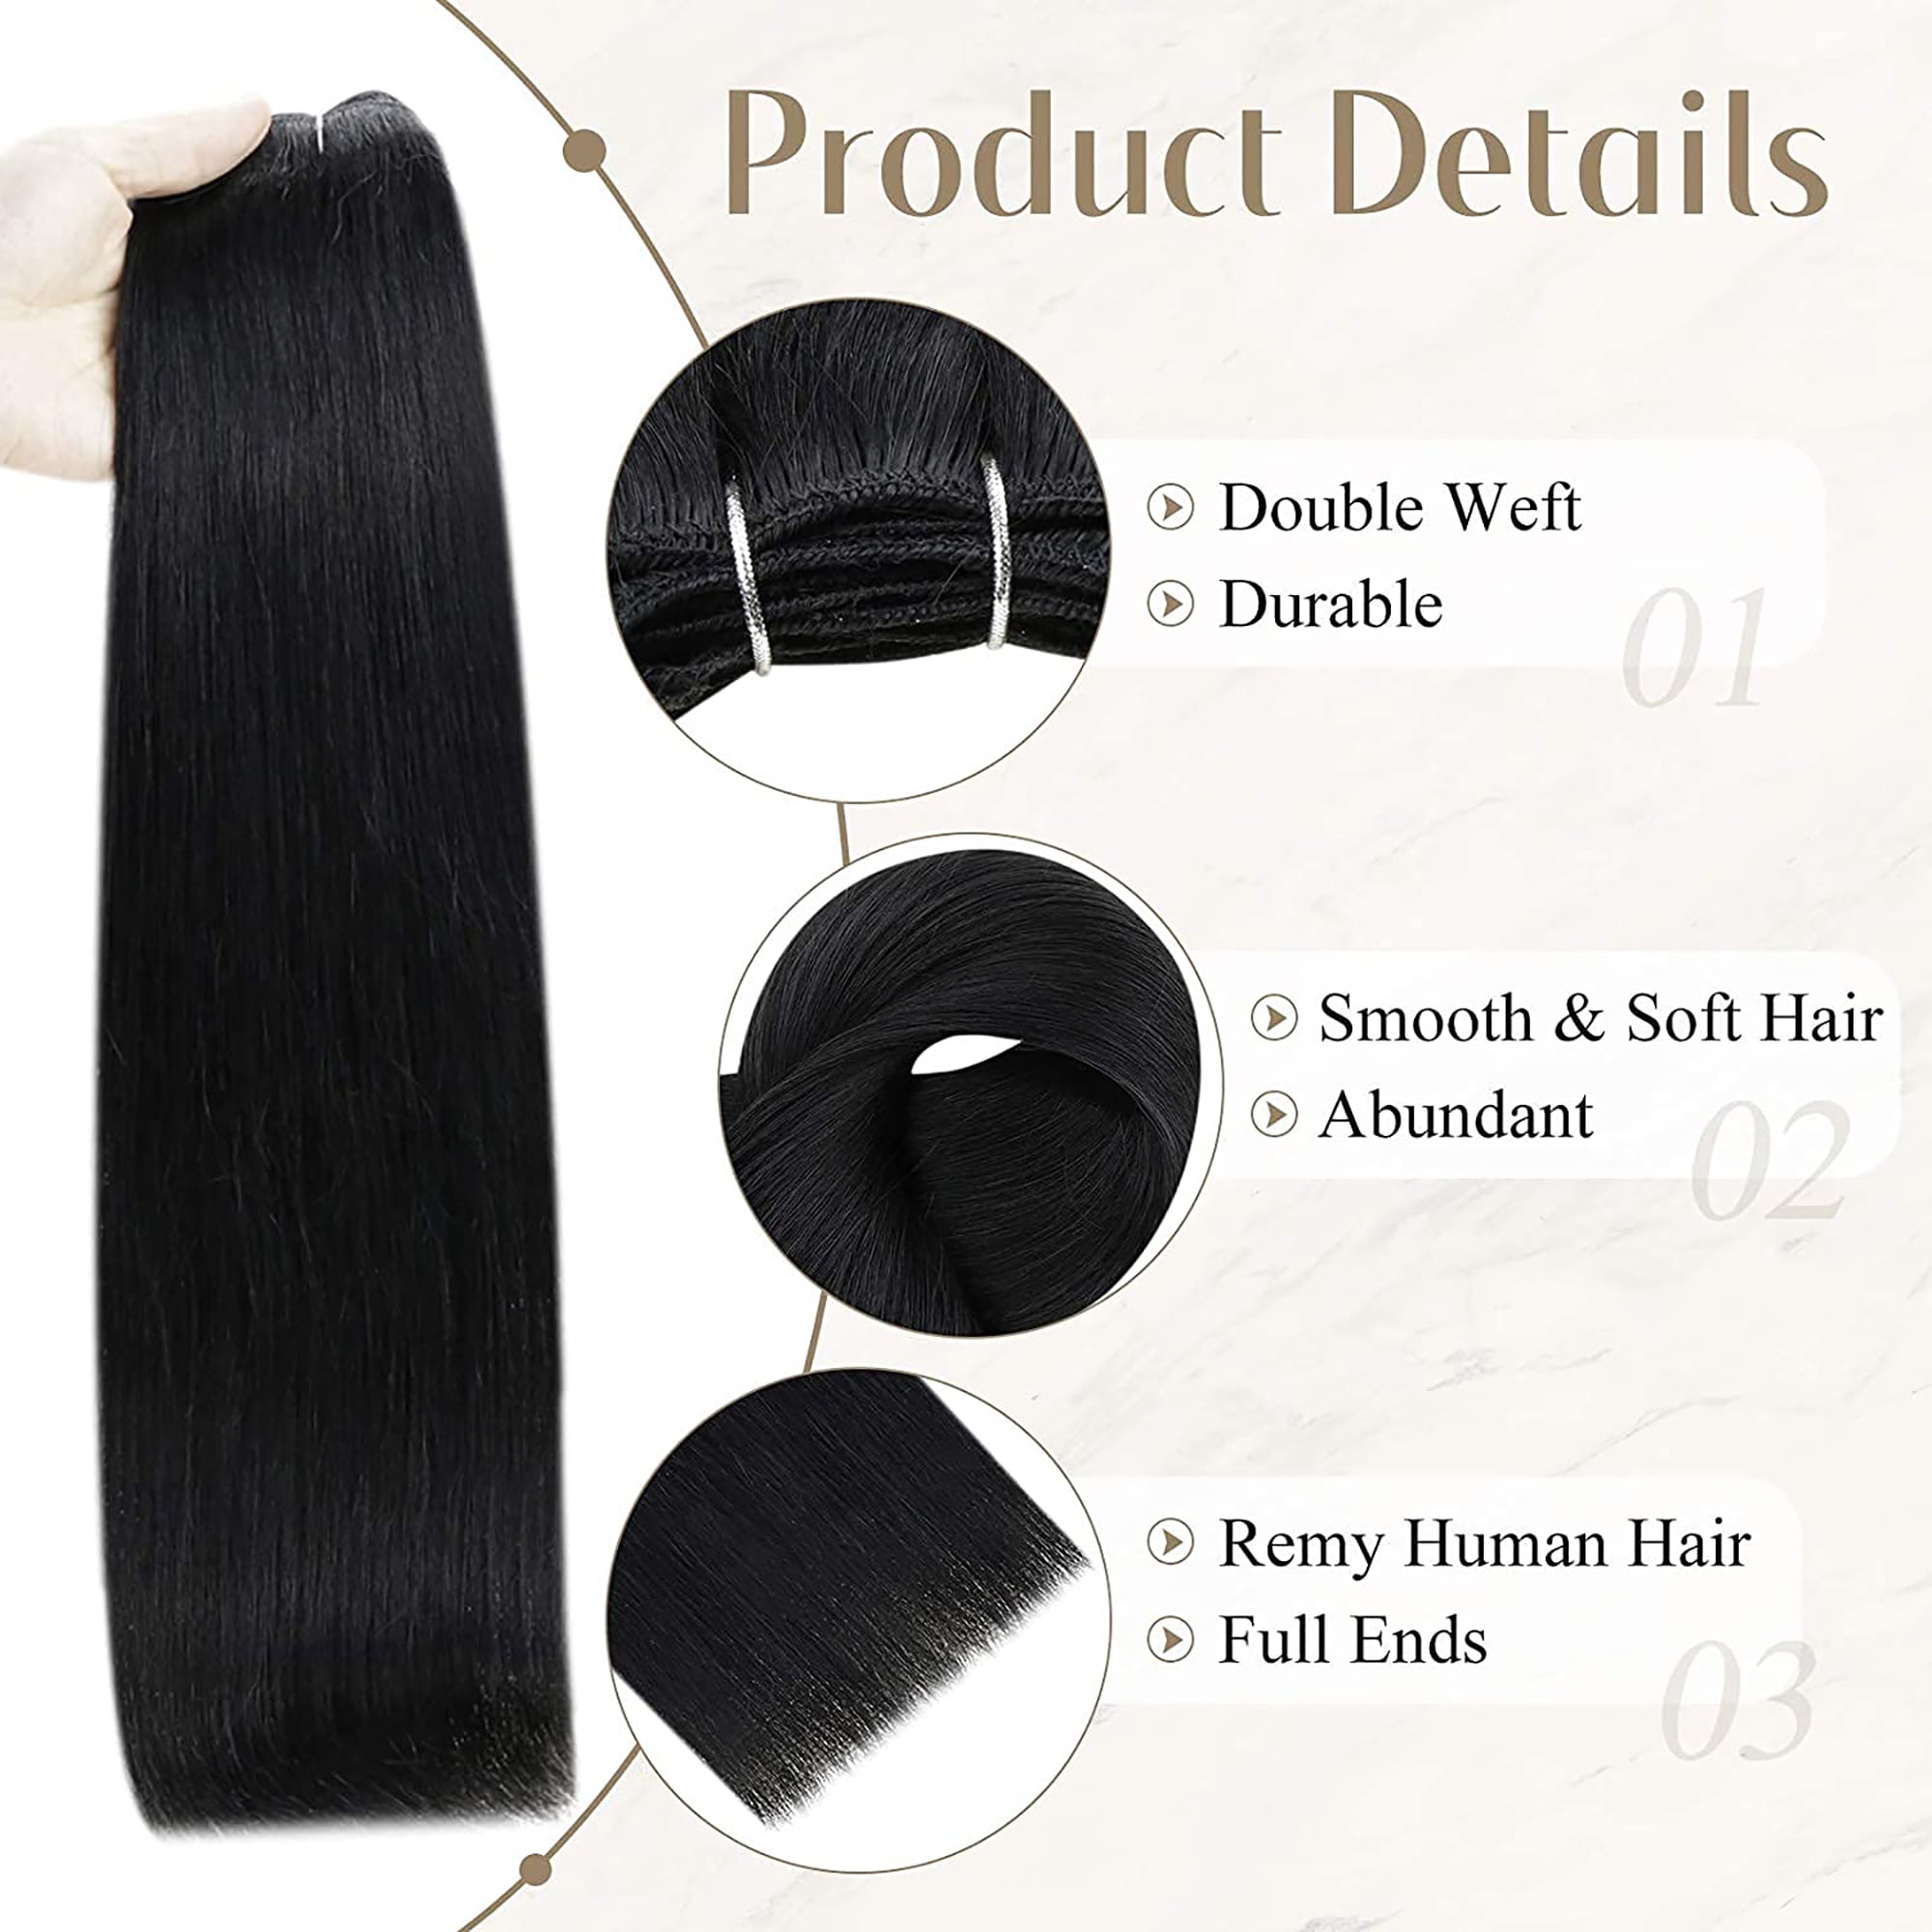 Full Shine Hair Weft Extensions 20 inch Remy Hair Jet Black Real Human Hair  100g Straight Hair Weft Bundles 